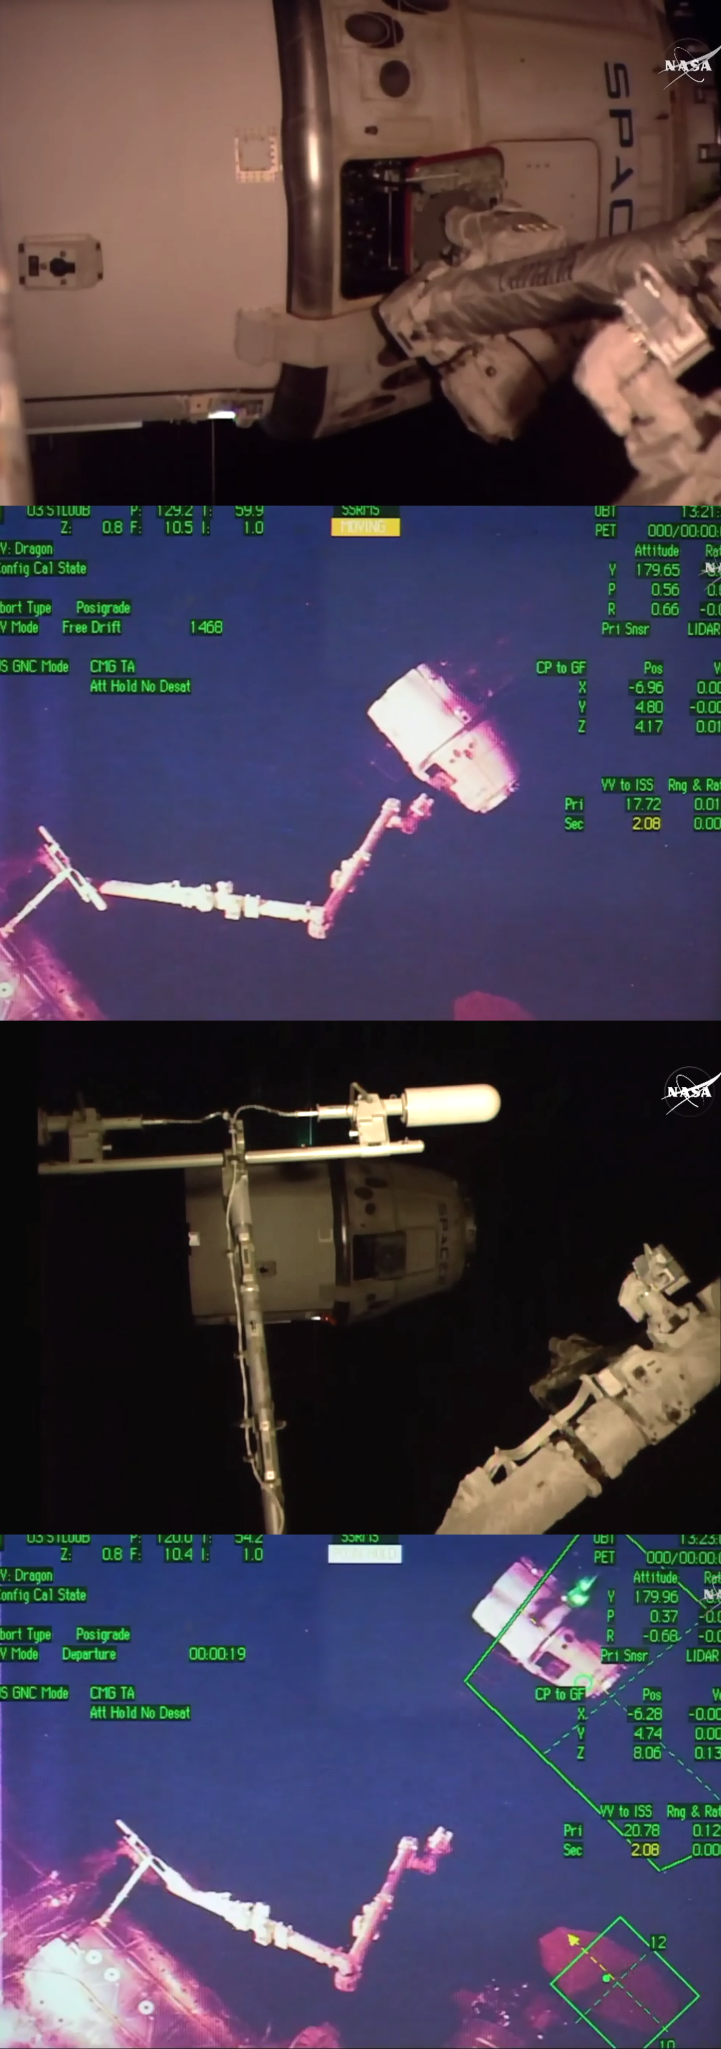 SpaceX Dragon resupply craft departs the International Space Station